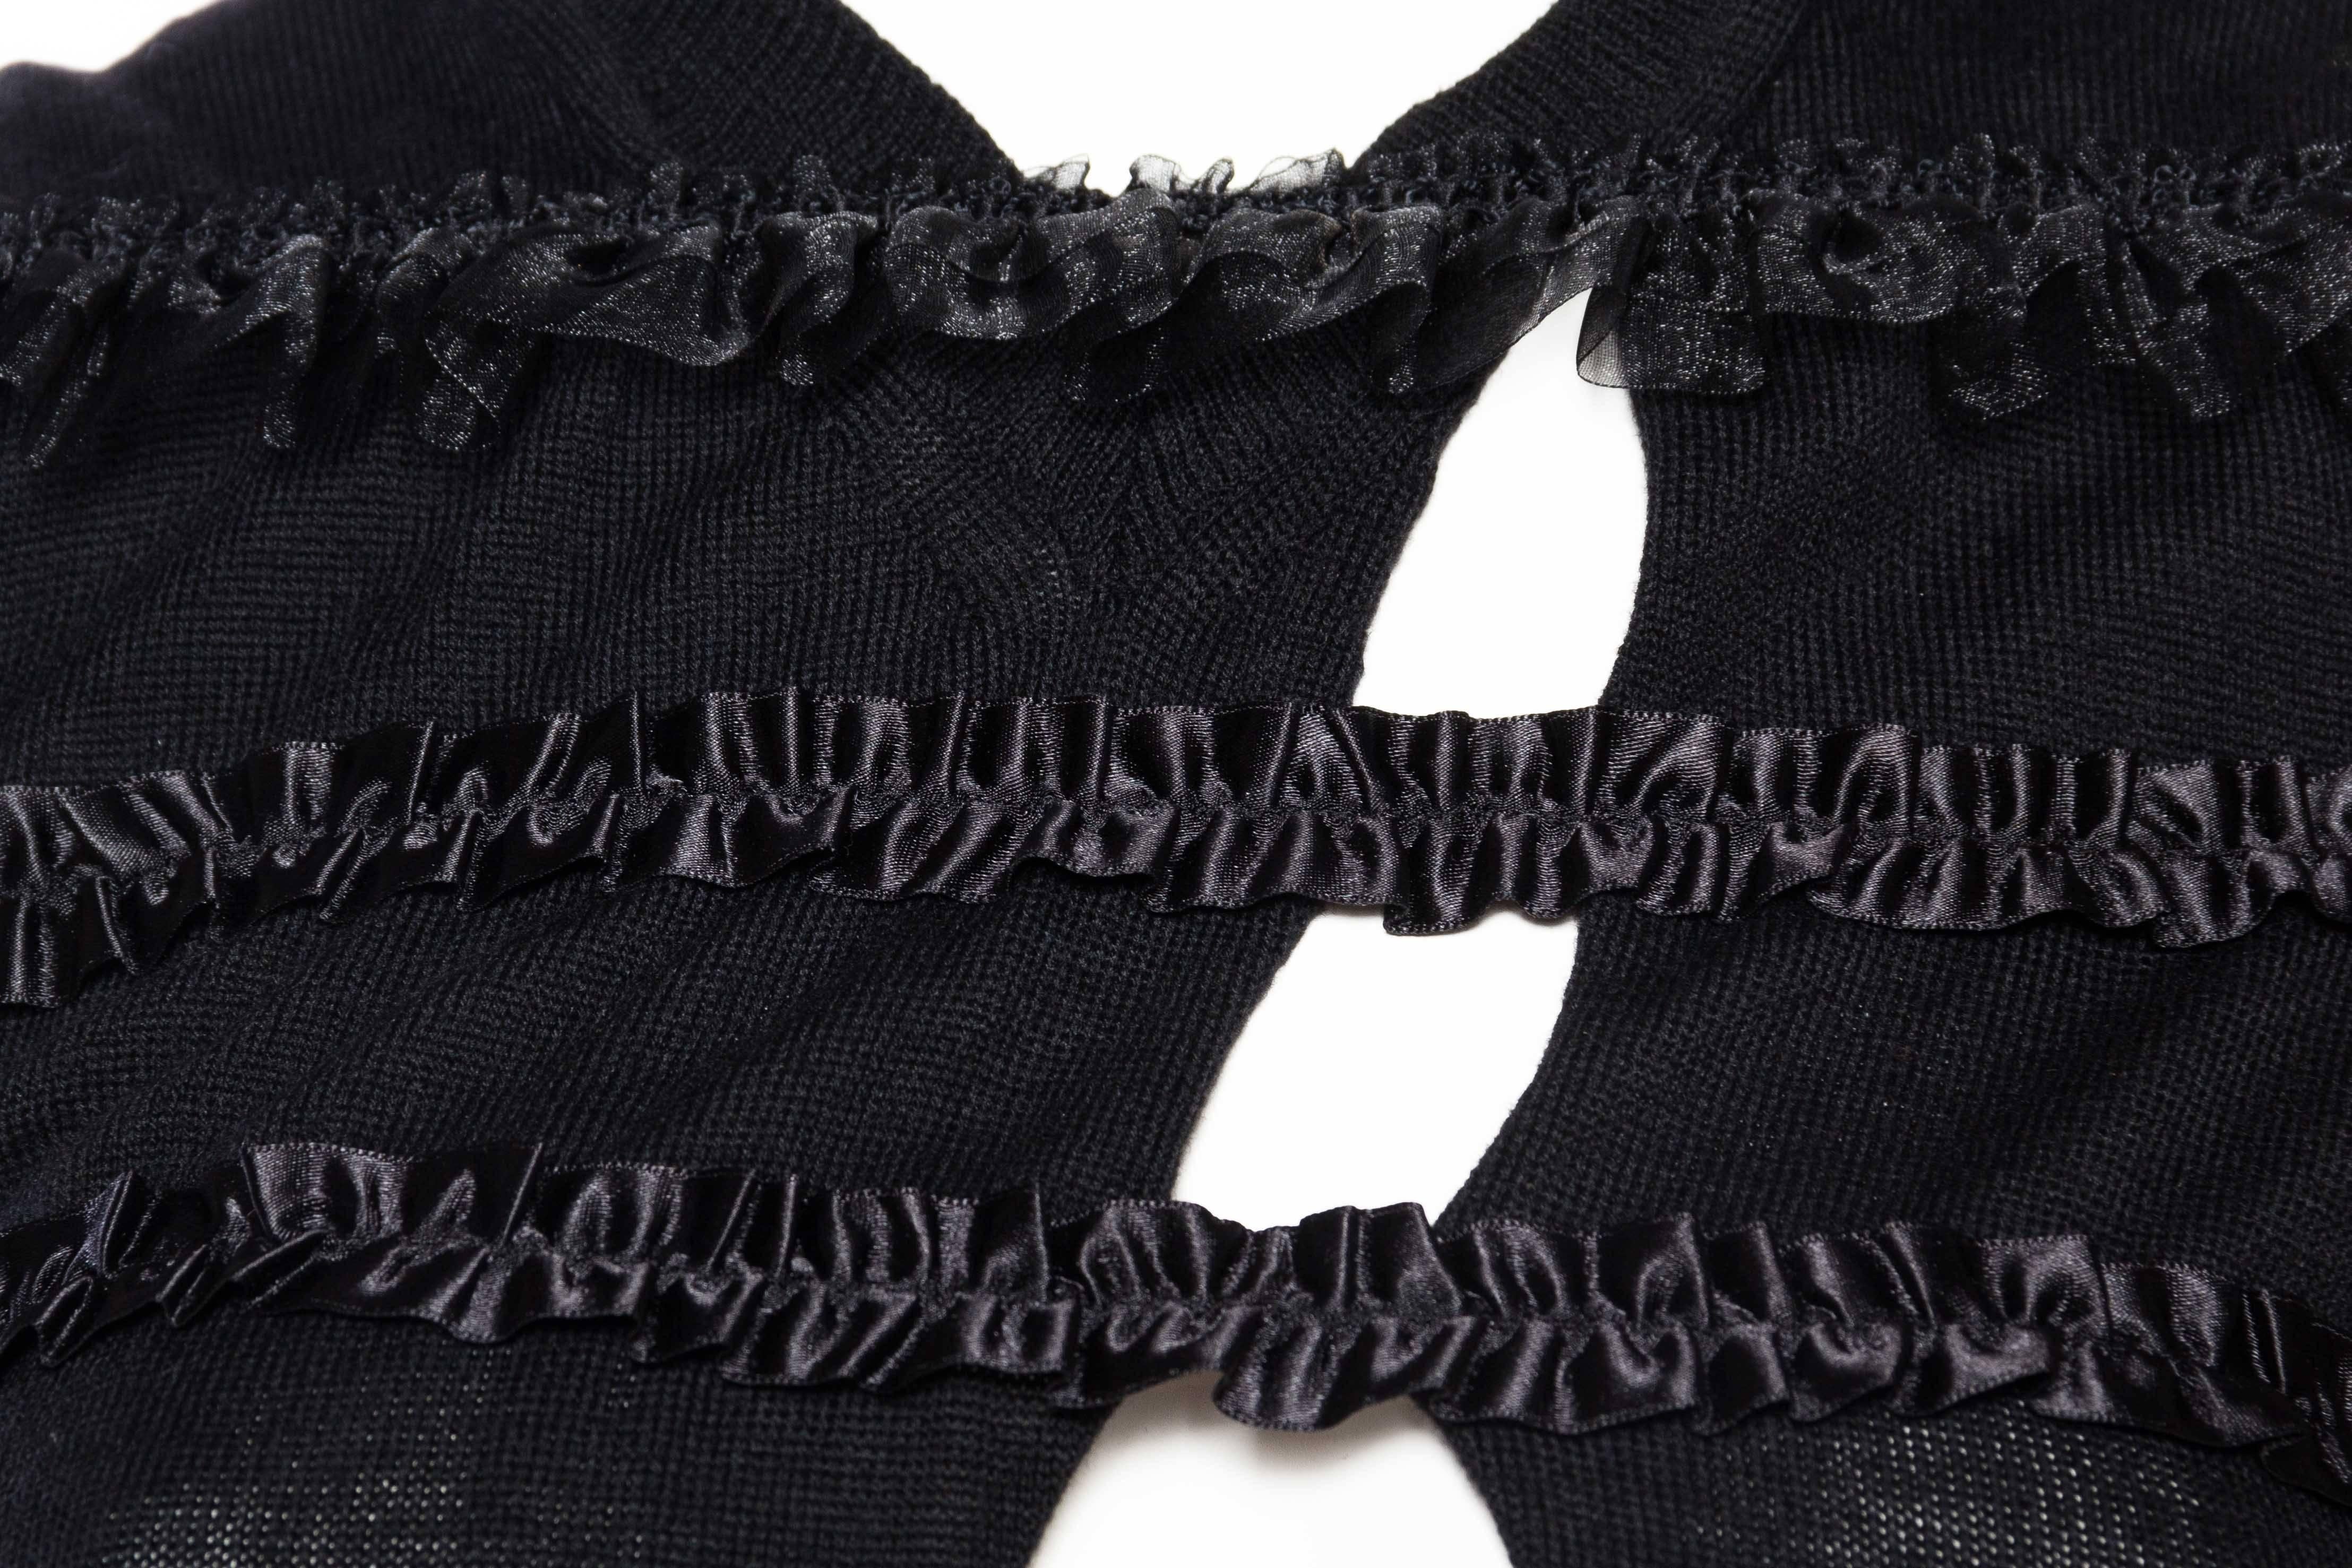 2000S COMME DES GARCONS Black Wool Deconstructed Ruffle Sweater Circa 2008 For Sale 6